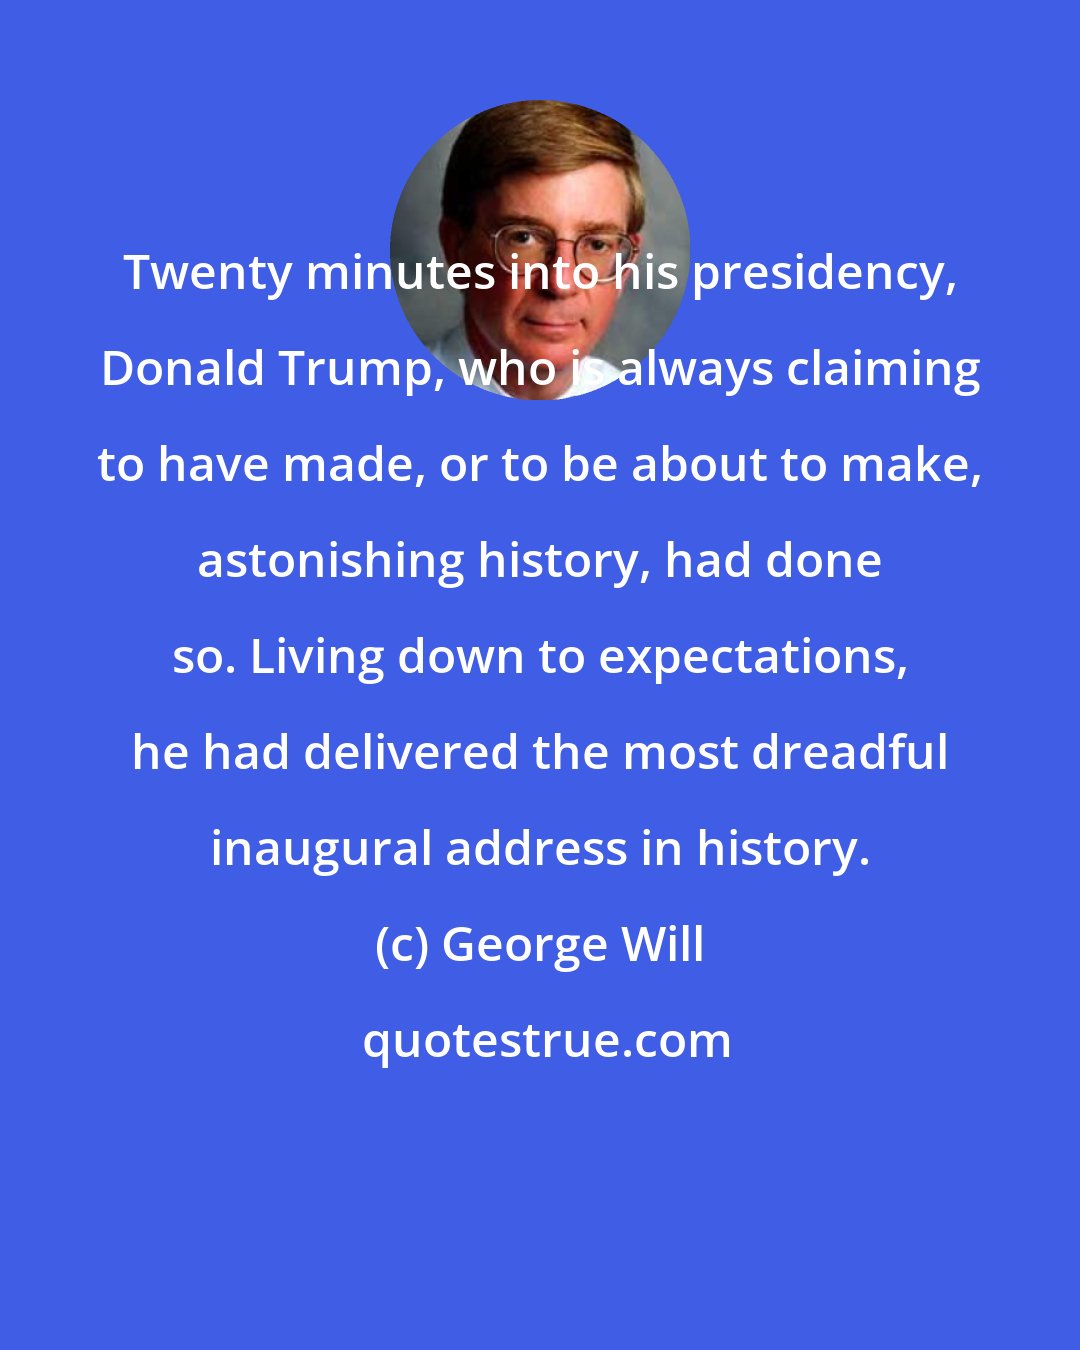 George Will: Twenty minutes into his presidency, Donald Trump, who is always claiming to have made, or to be about to make, astonishing history, had done so. Living down to expectations, he had delivered the most dreadful inaugural address in history.